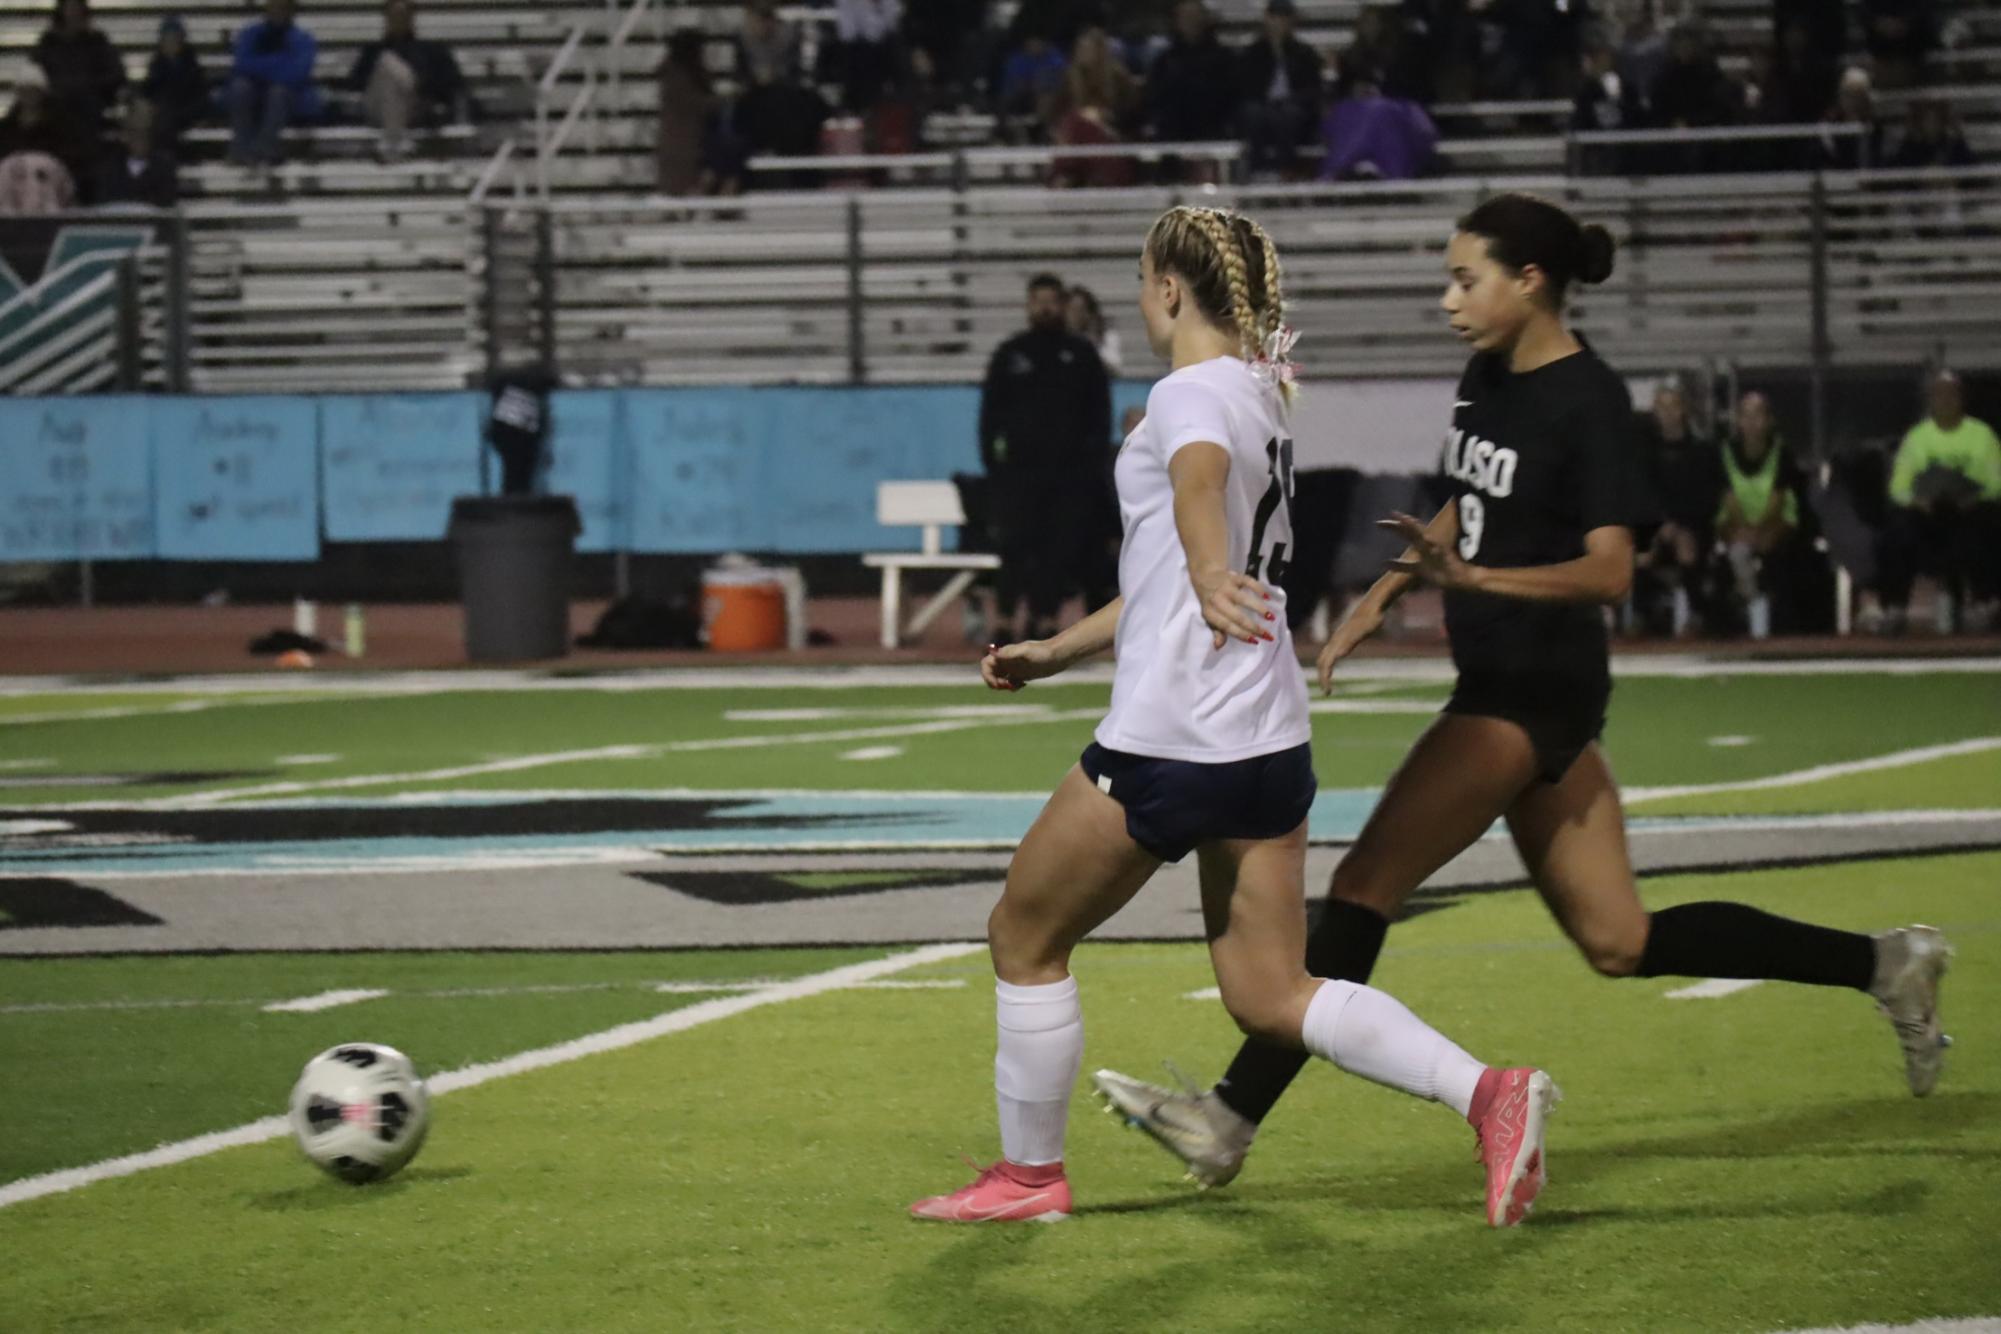 Aliso Niguel High Girls Soccer Concludes Season With a Third Place Finish and CIF Participation